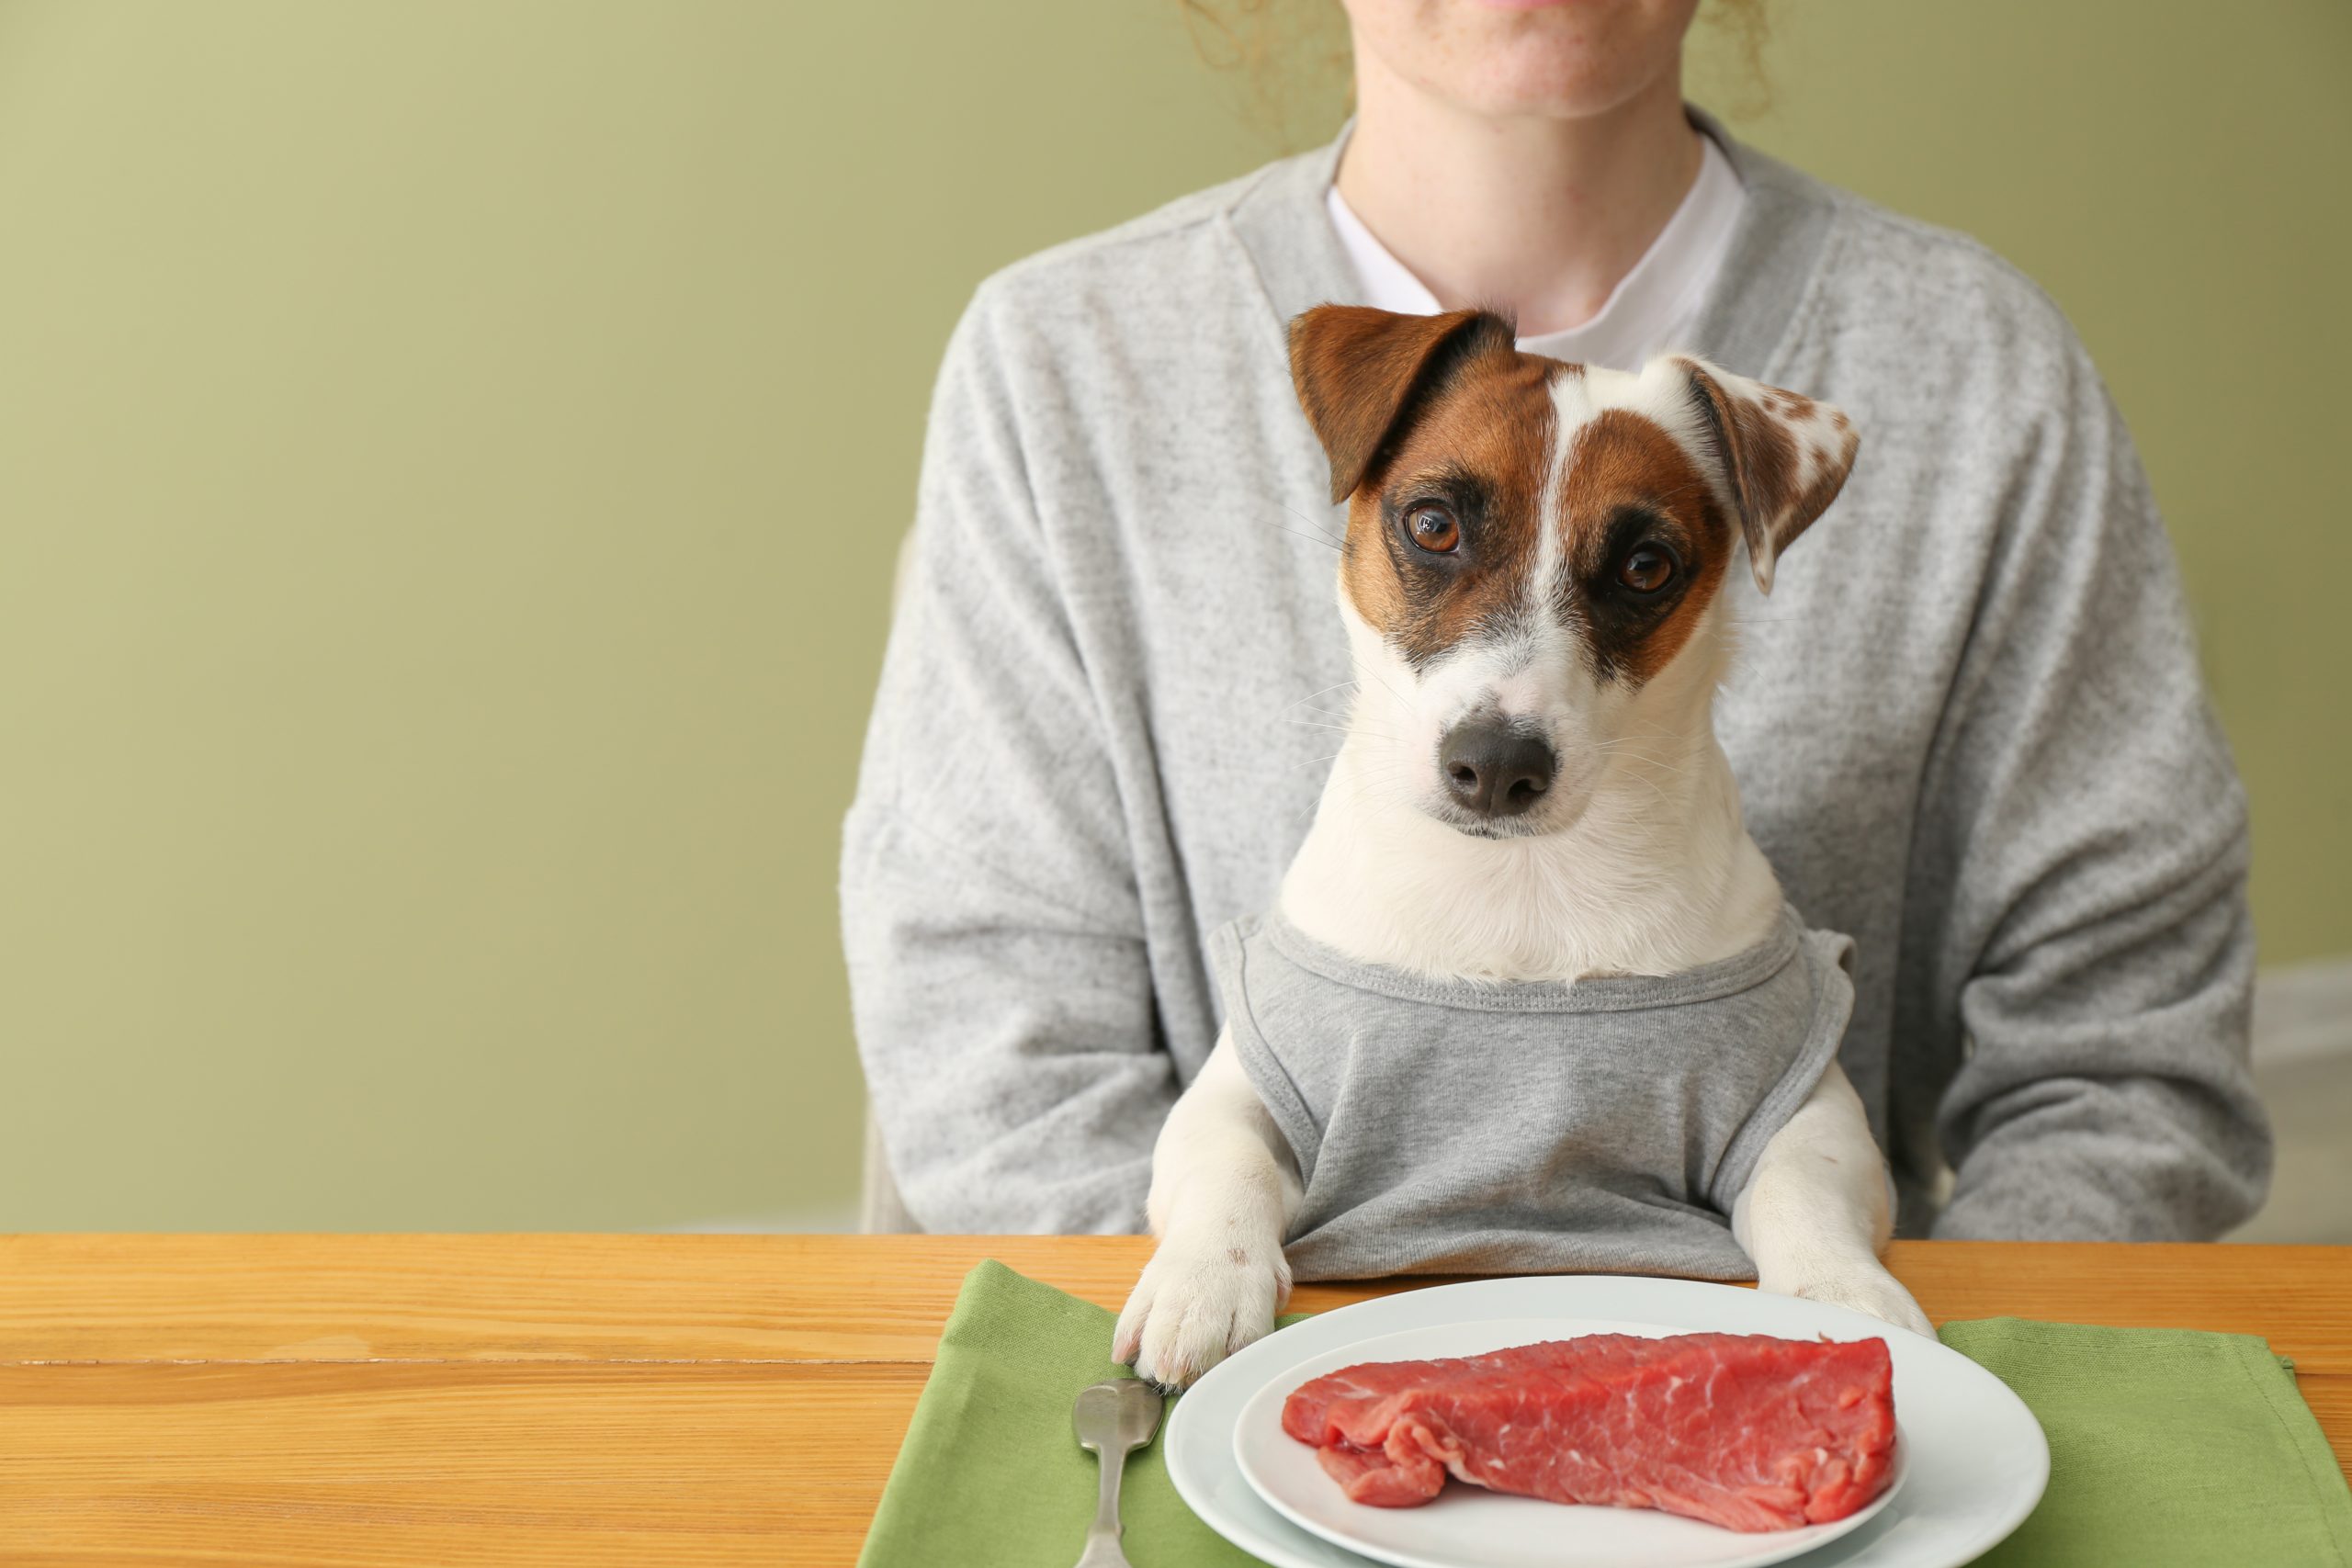 Should I Feed My Pet a Raw Diet?